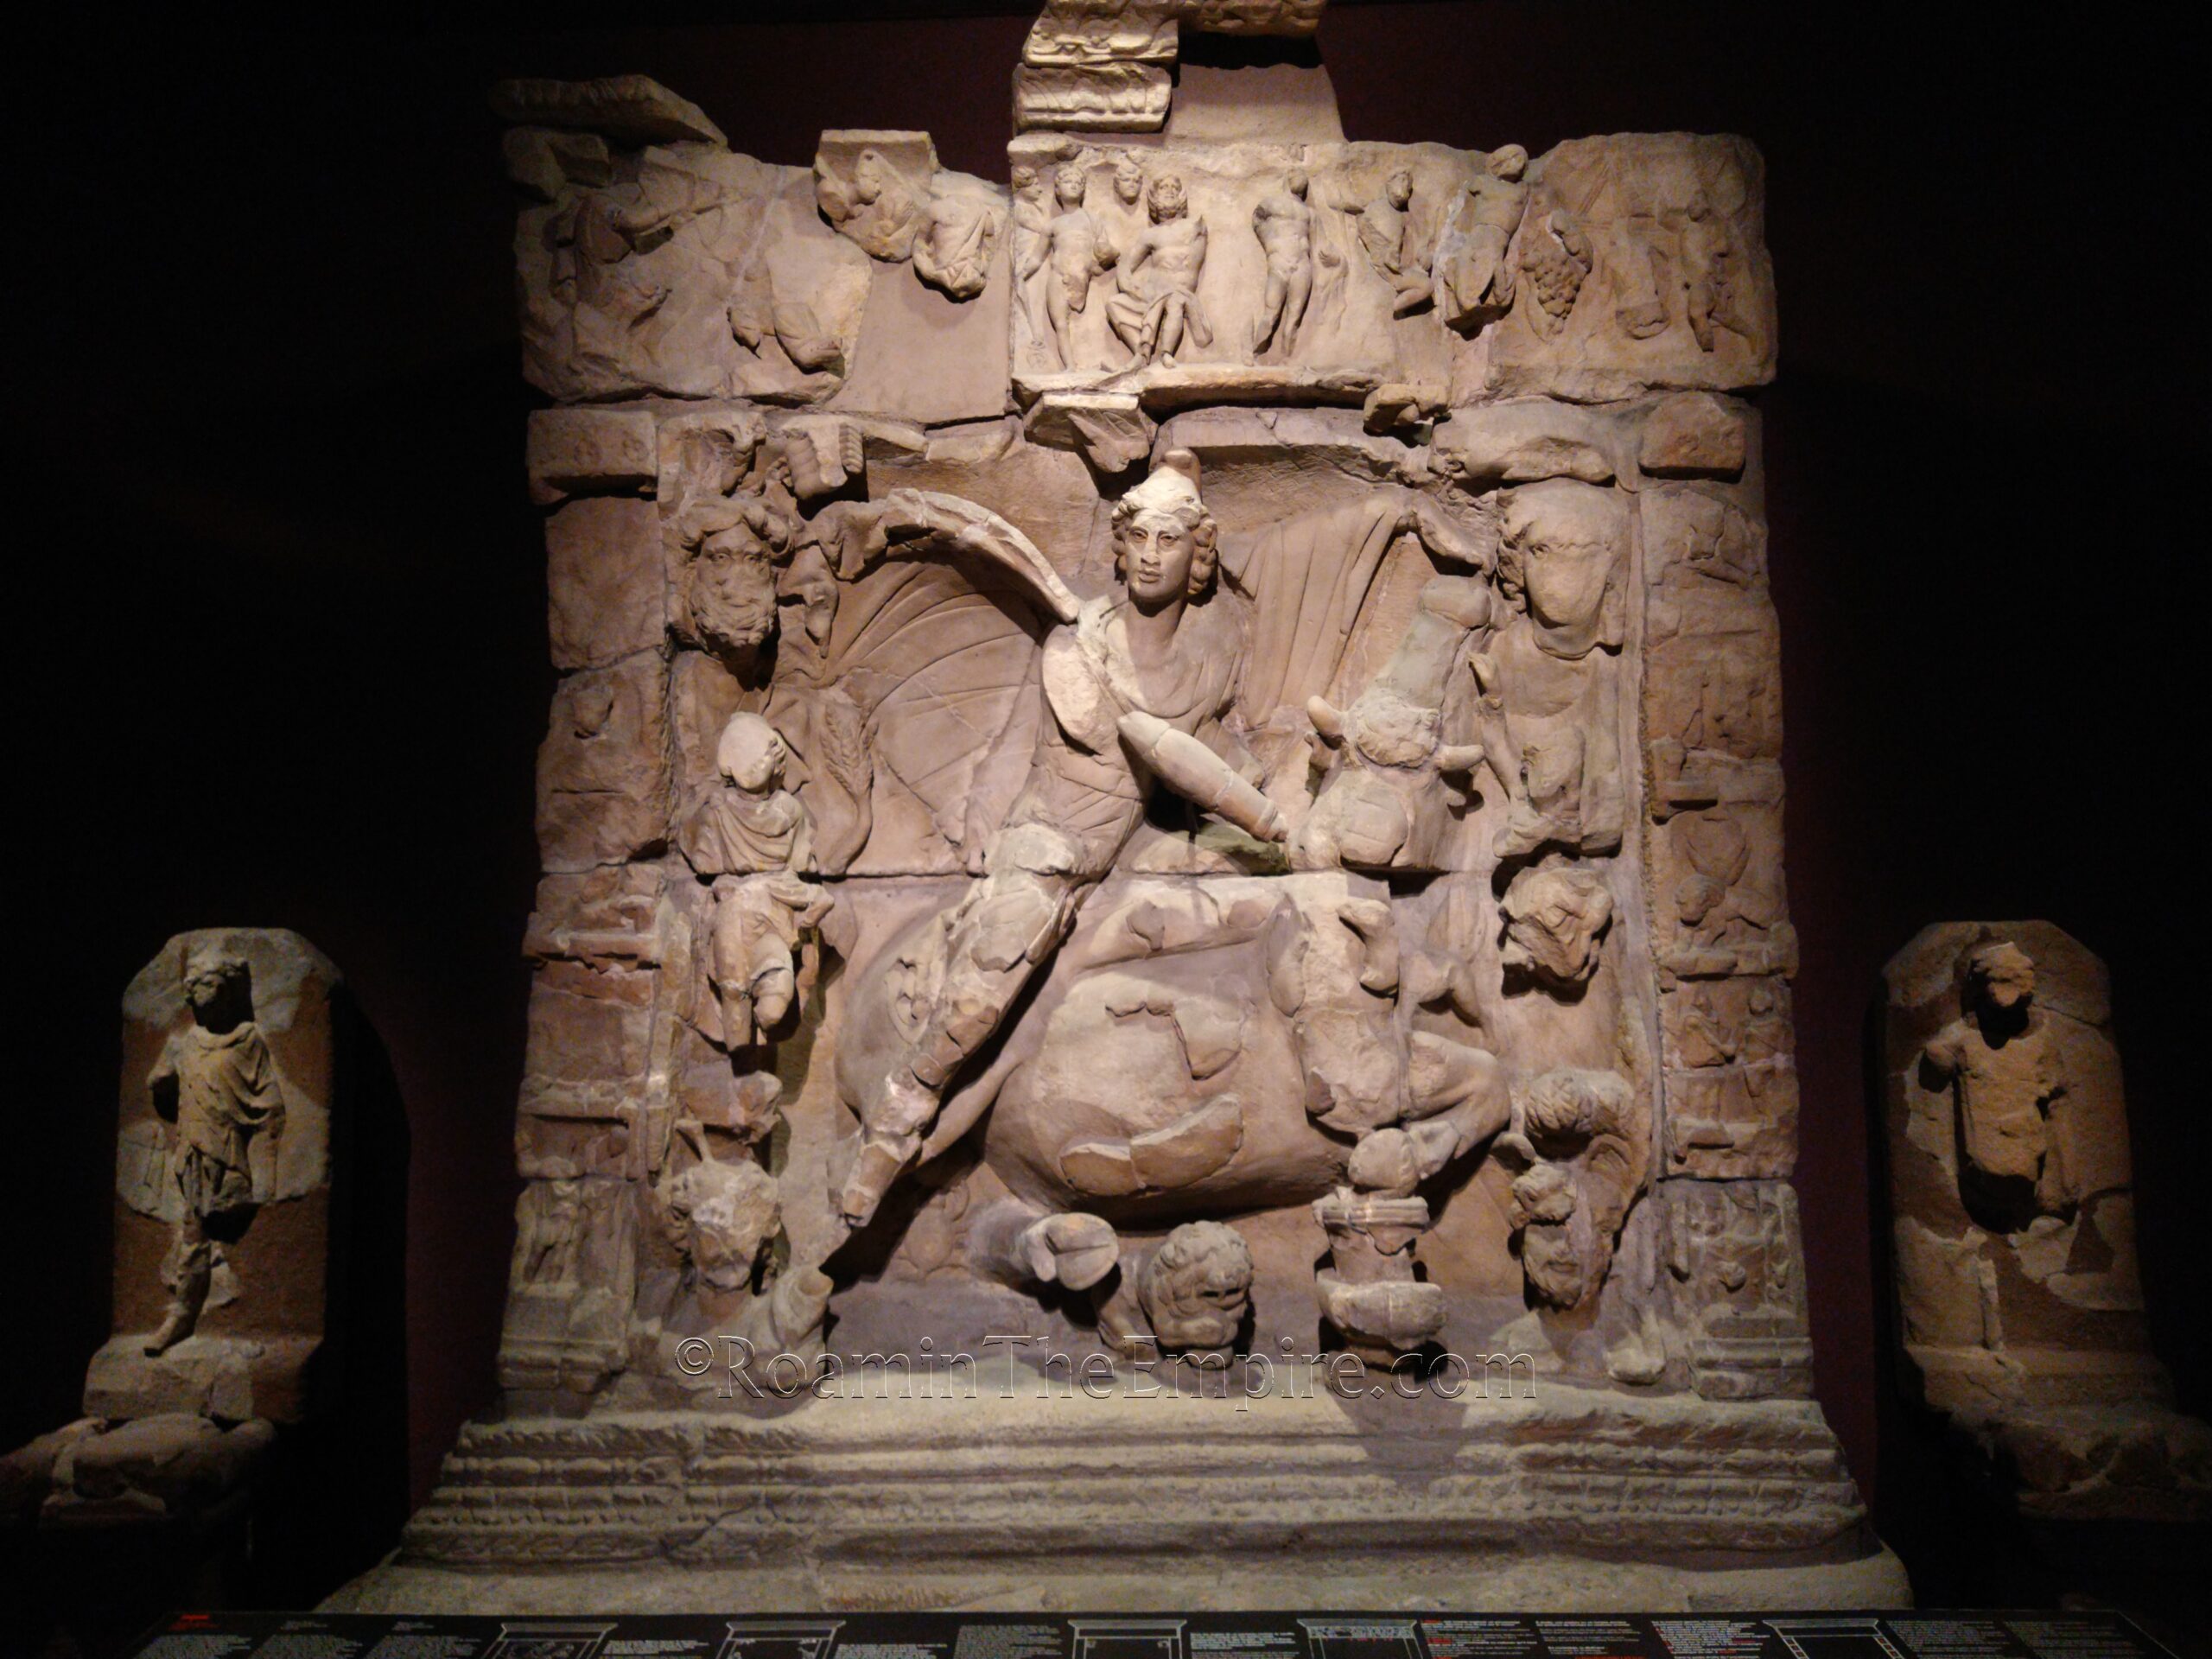 Limestone Mithraic tauroctony relief from Sarrebourg flanked by torchbearers. Musée de La Cour d'Or de Metz.